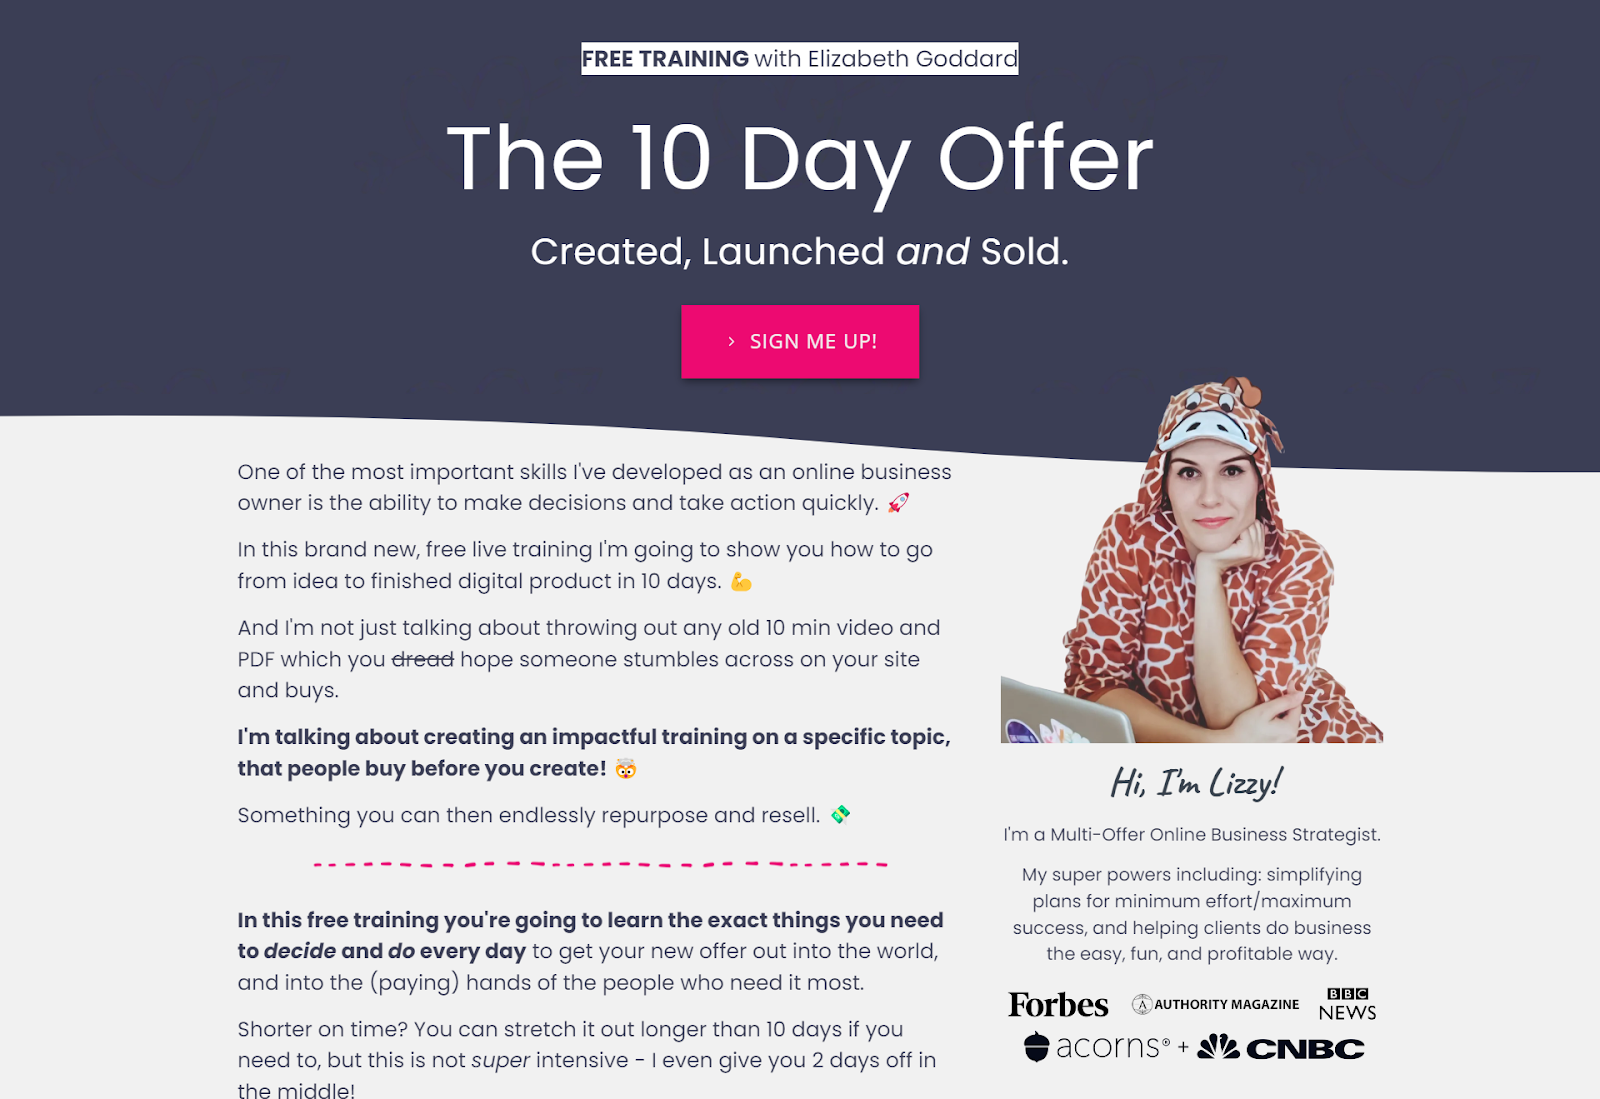 Elizabeth Goddard's opt-in page for her "The 10 Day Offer" training